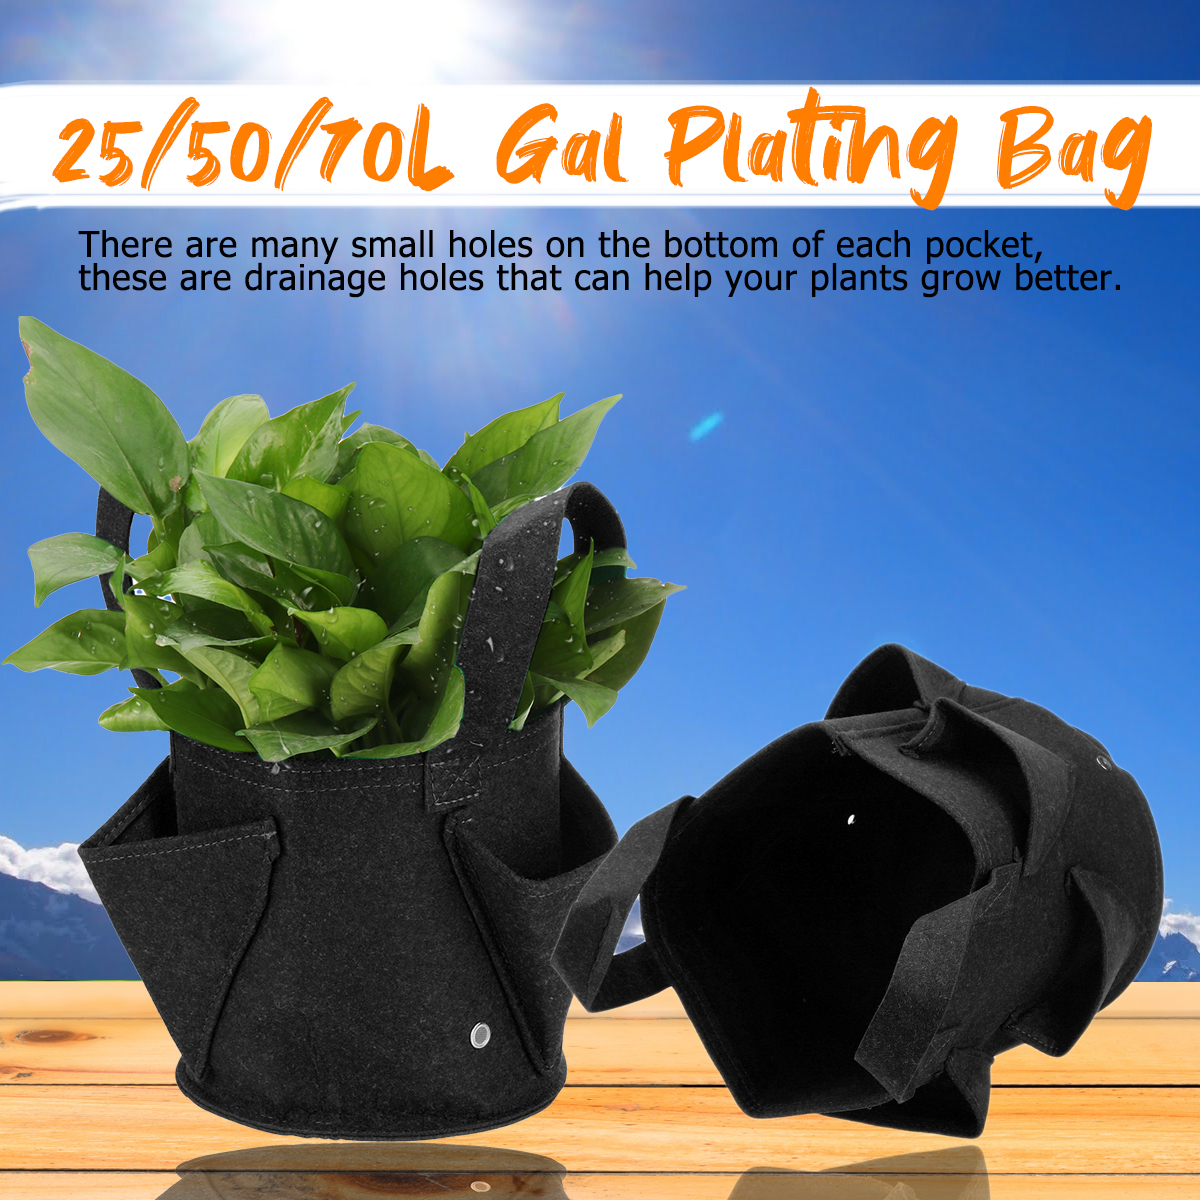 2mm-Ultra-Thick-Black-Round-Planting-Container-Non-Woven-Felt-Planter-Pot-Grow-Bags-Plants-Nursery-S-1544992-1